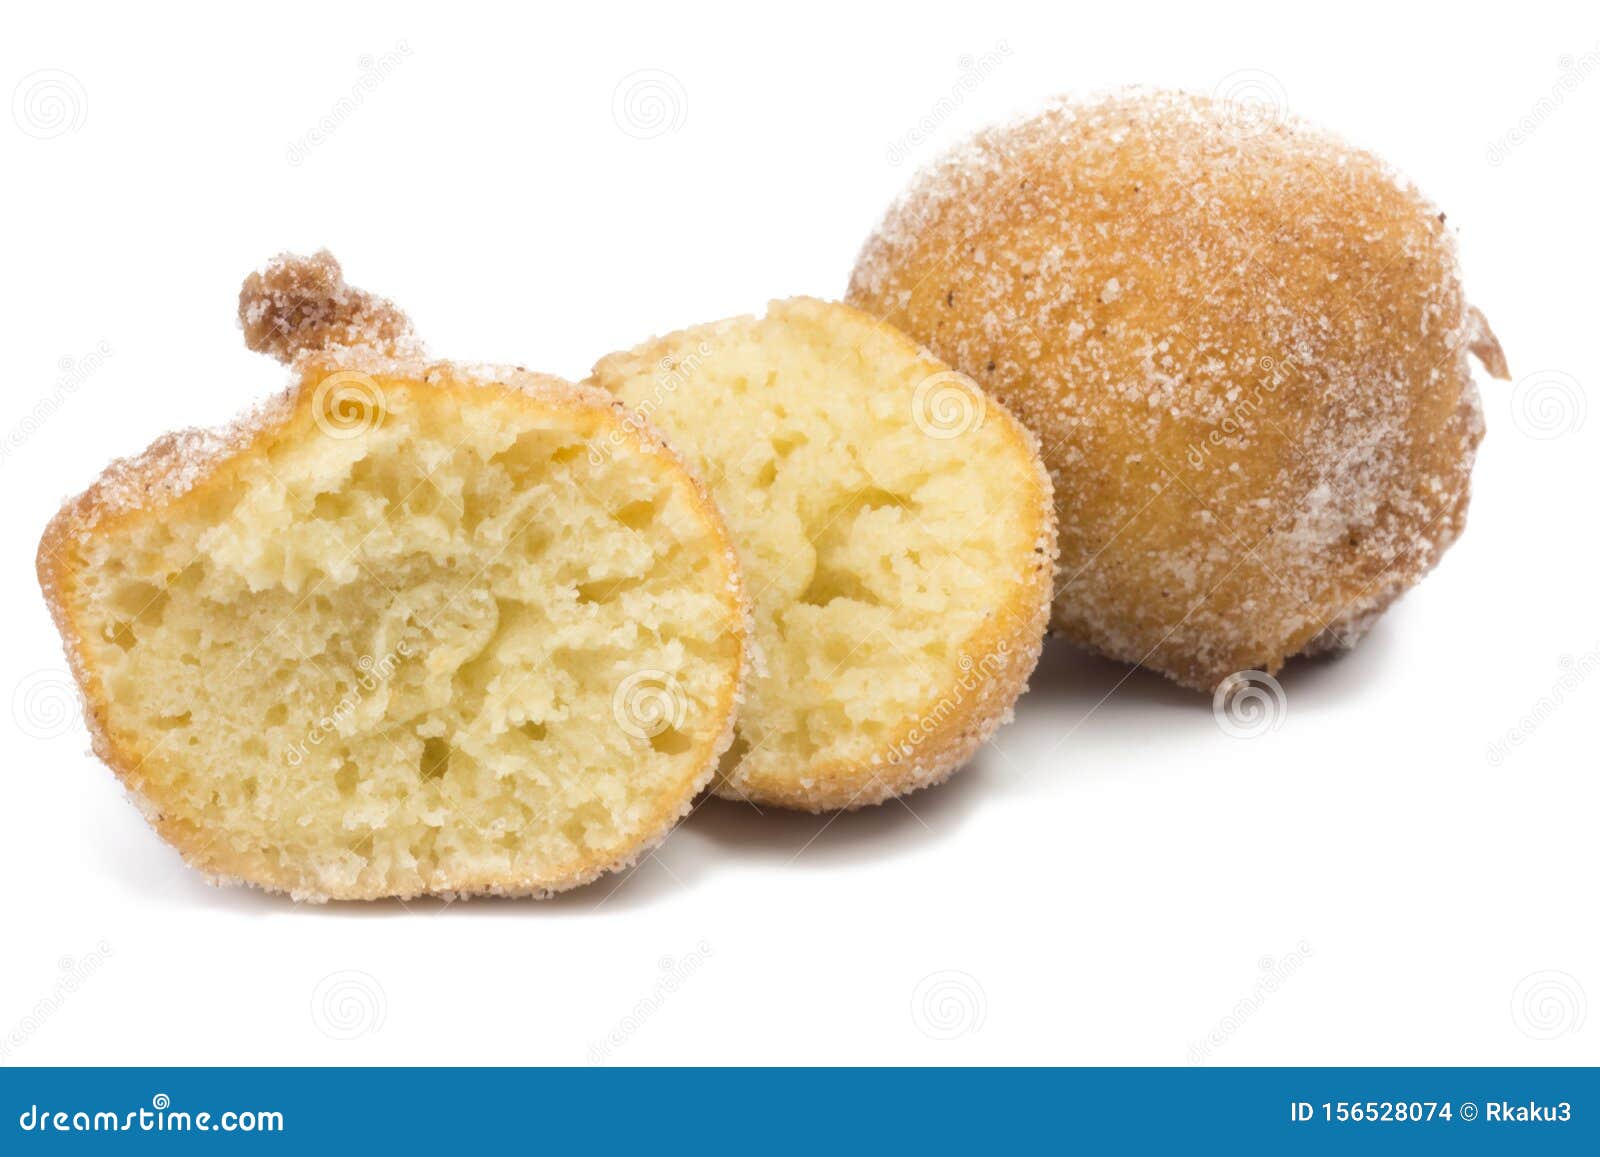 traditional brazilian mini fried cake called bolinho de chuva with one open  in white background close